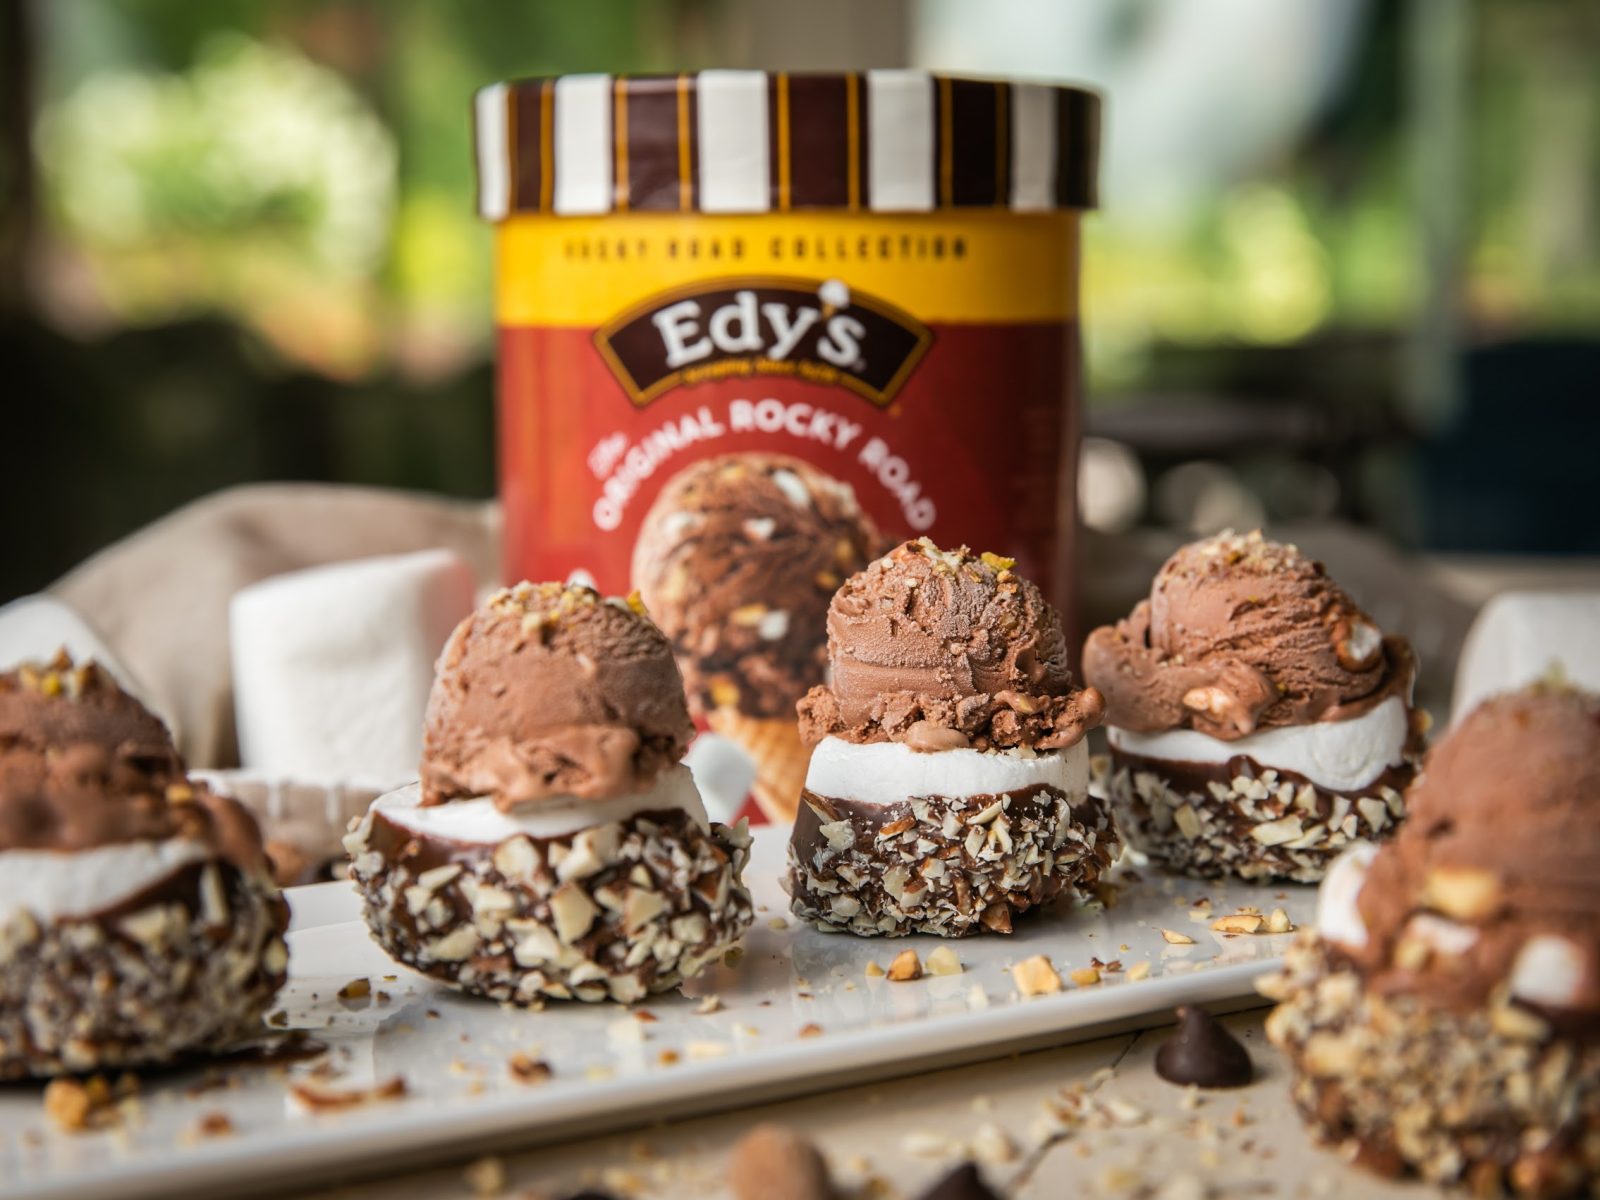 Take Advantage Of The Publix BOGO Sale On Edy’s® Ice Cream And Scoop Up Happiness!